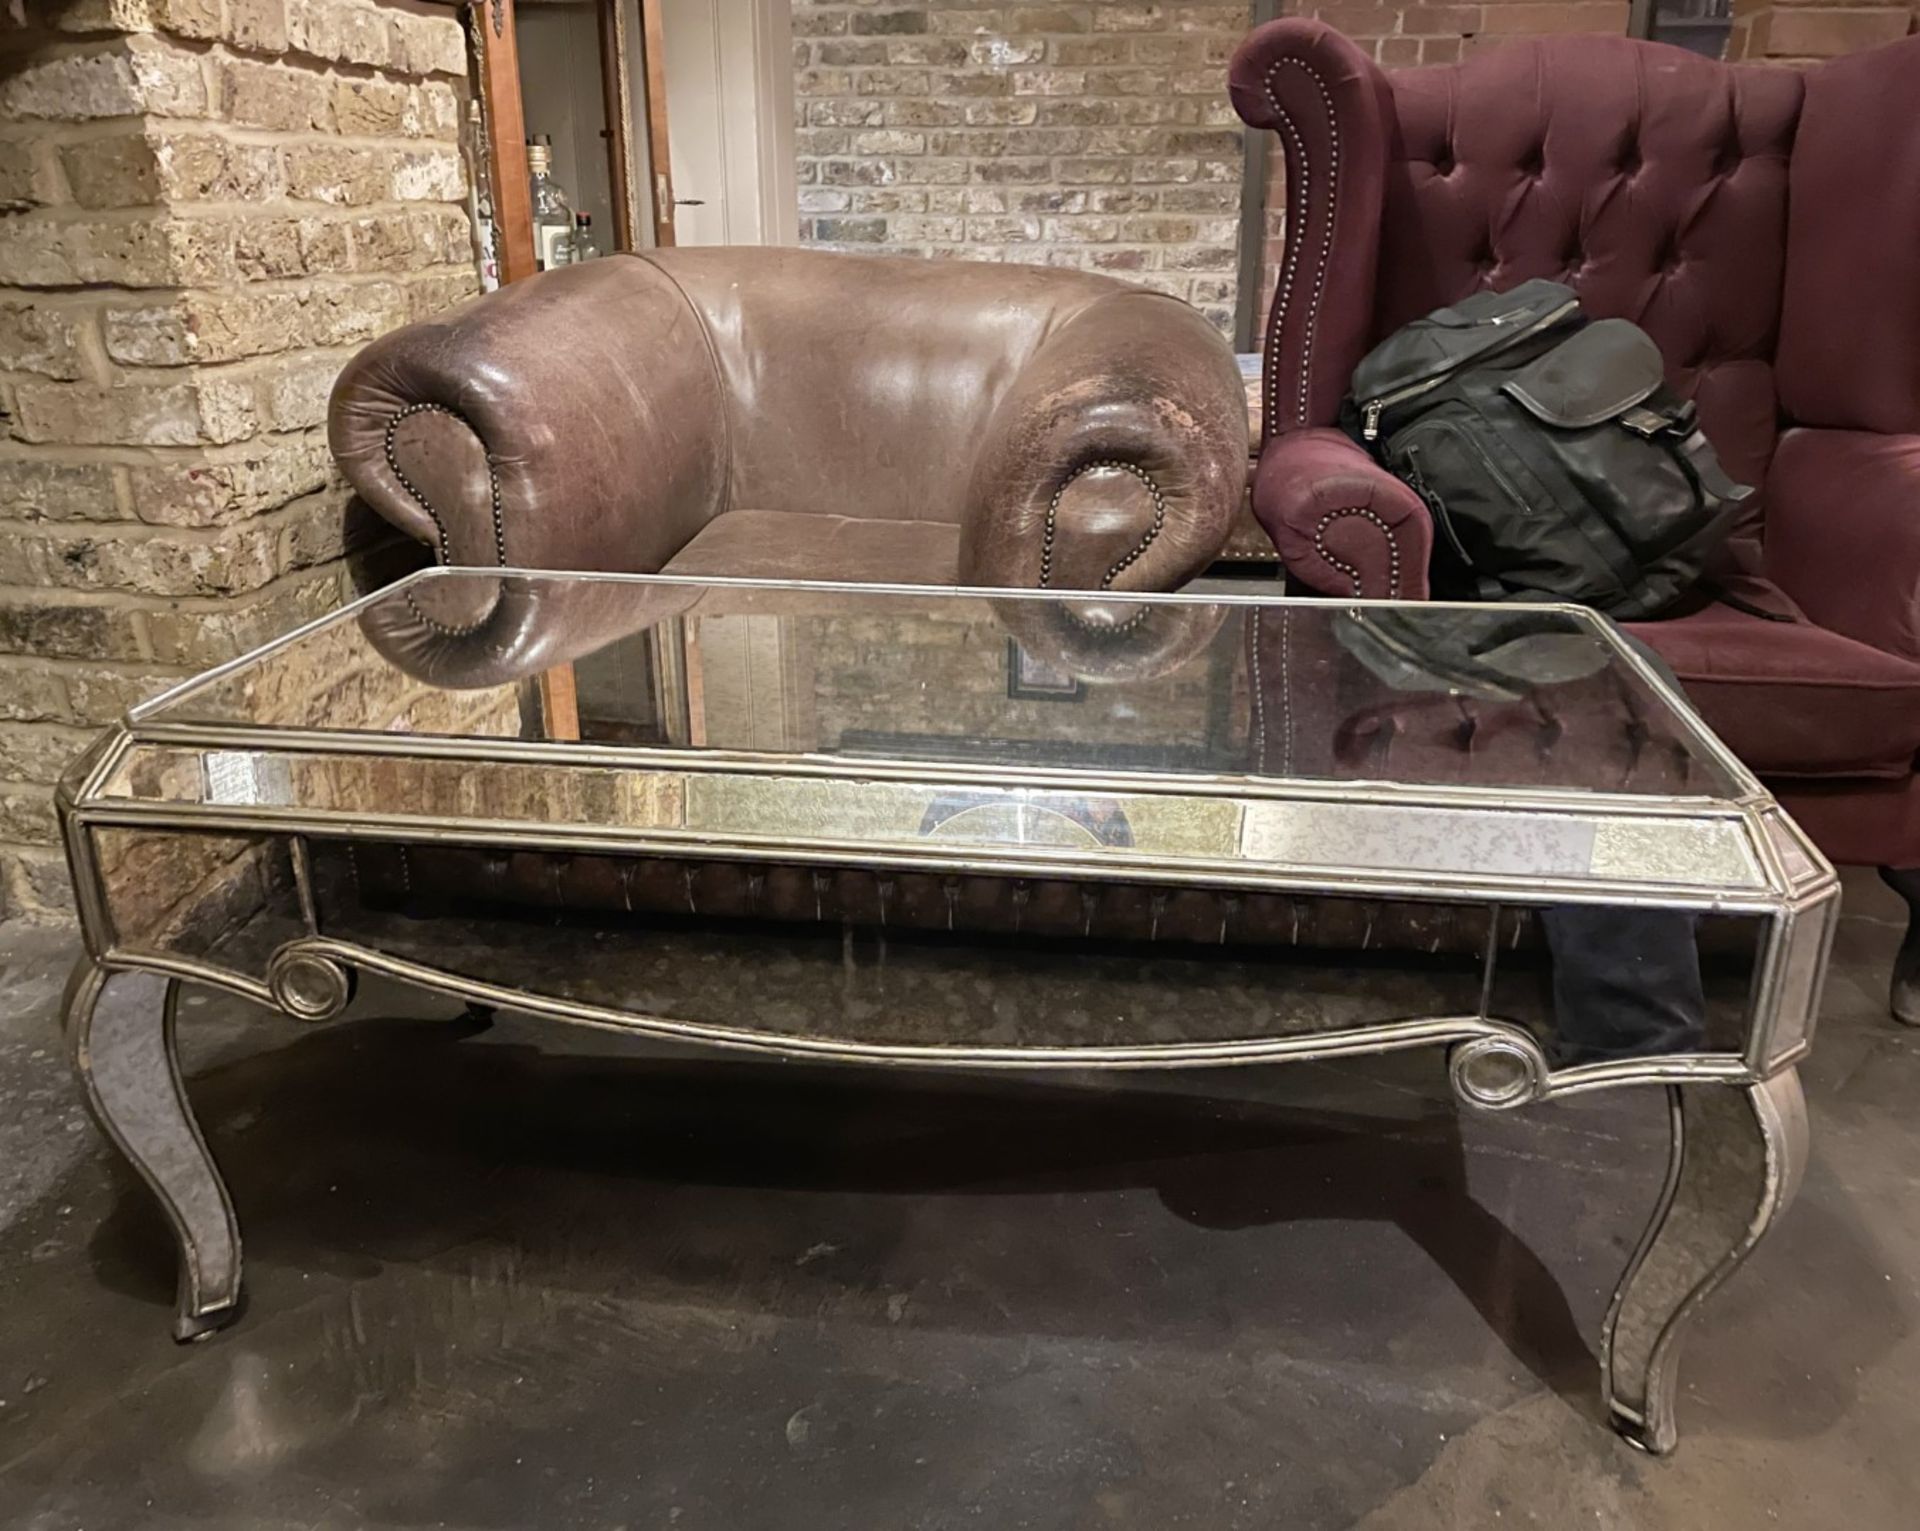 1 x Vintage French-style Mirrored Rectangular Cocktail Coffee Table with an Aged Aesthetic - Image 3 of 10